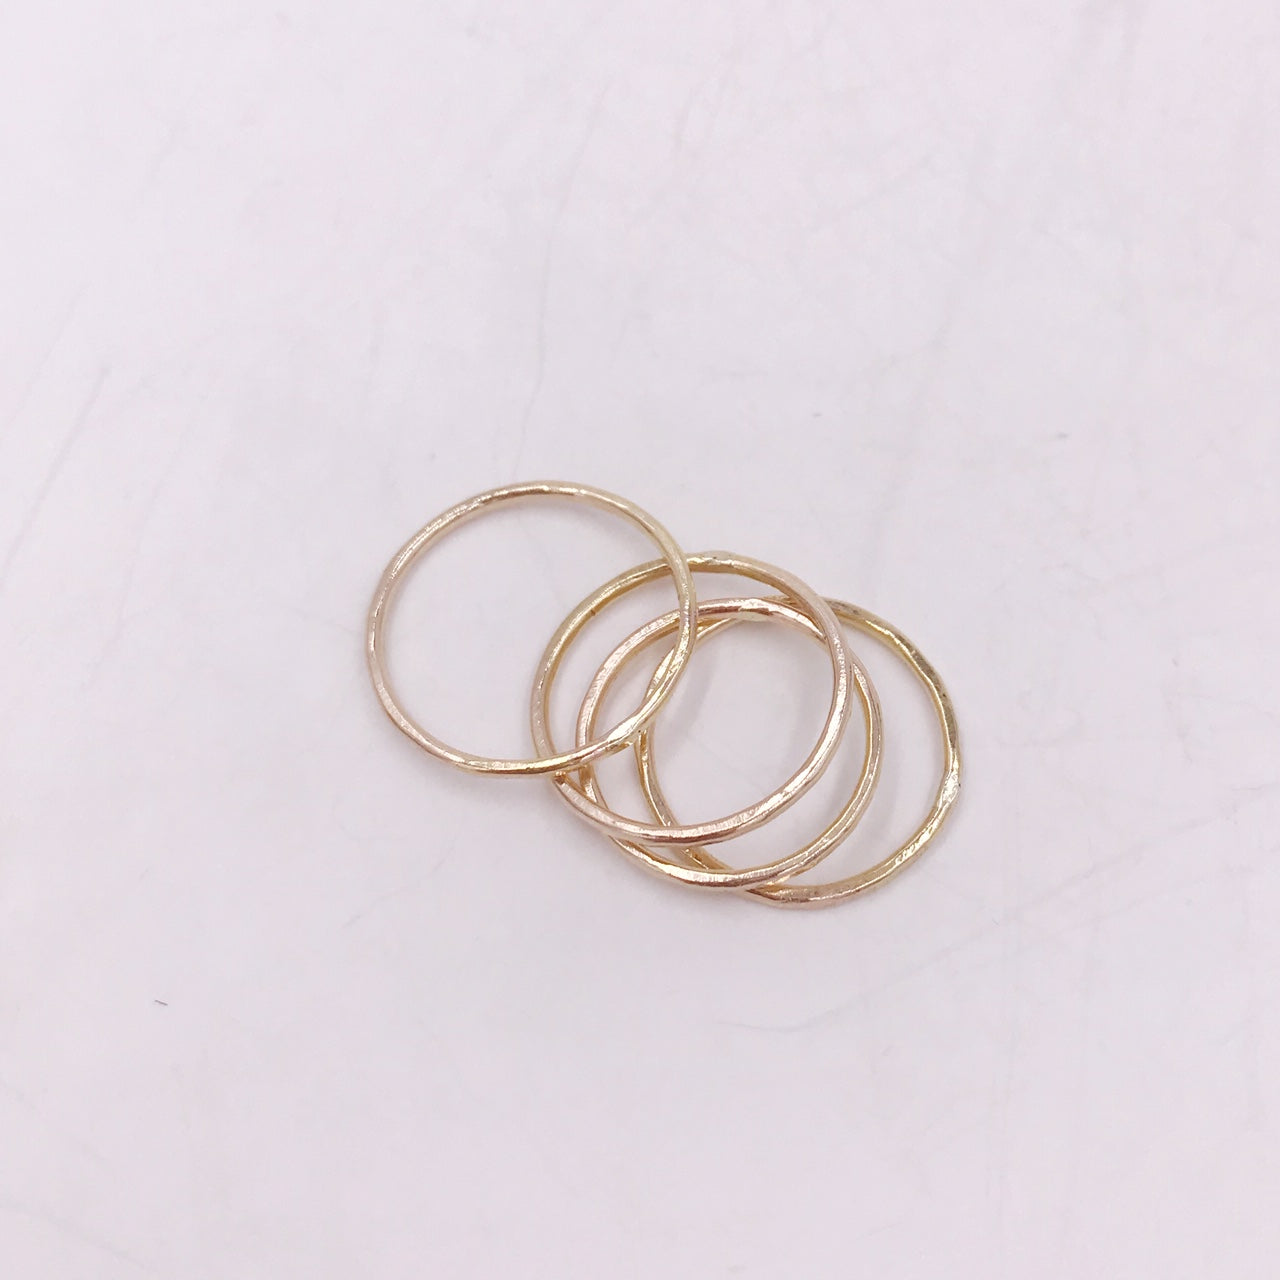 Hammered stacking rings